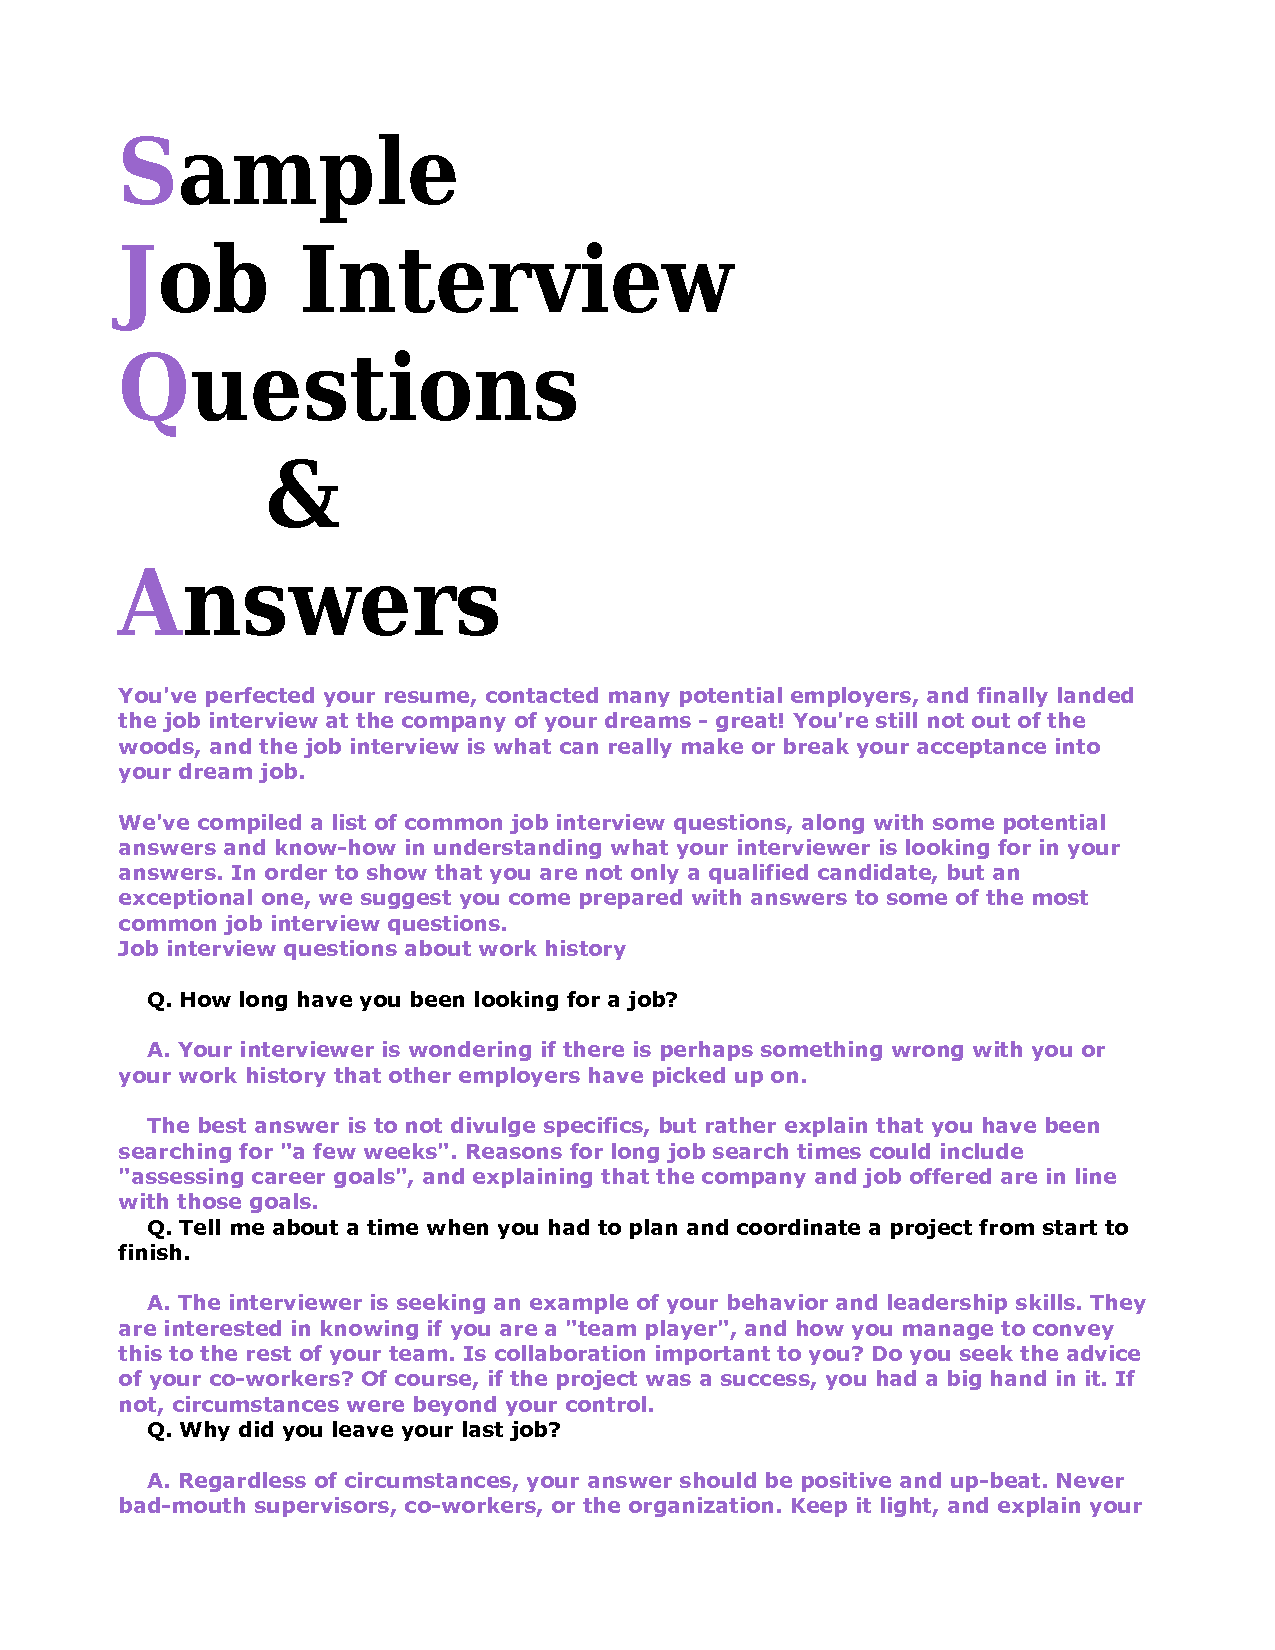 Answering federal job questions